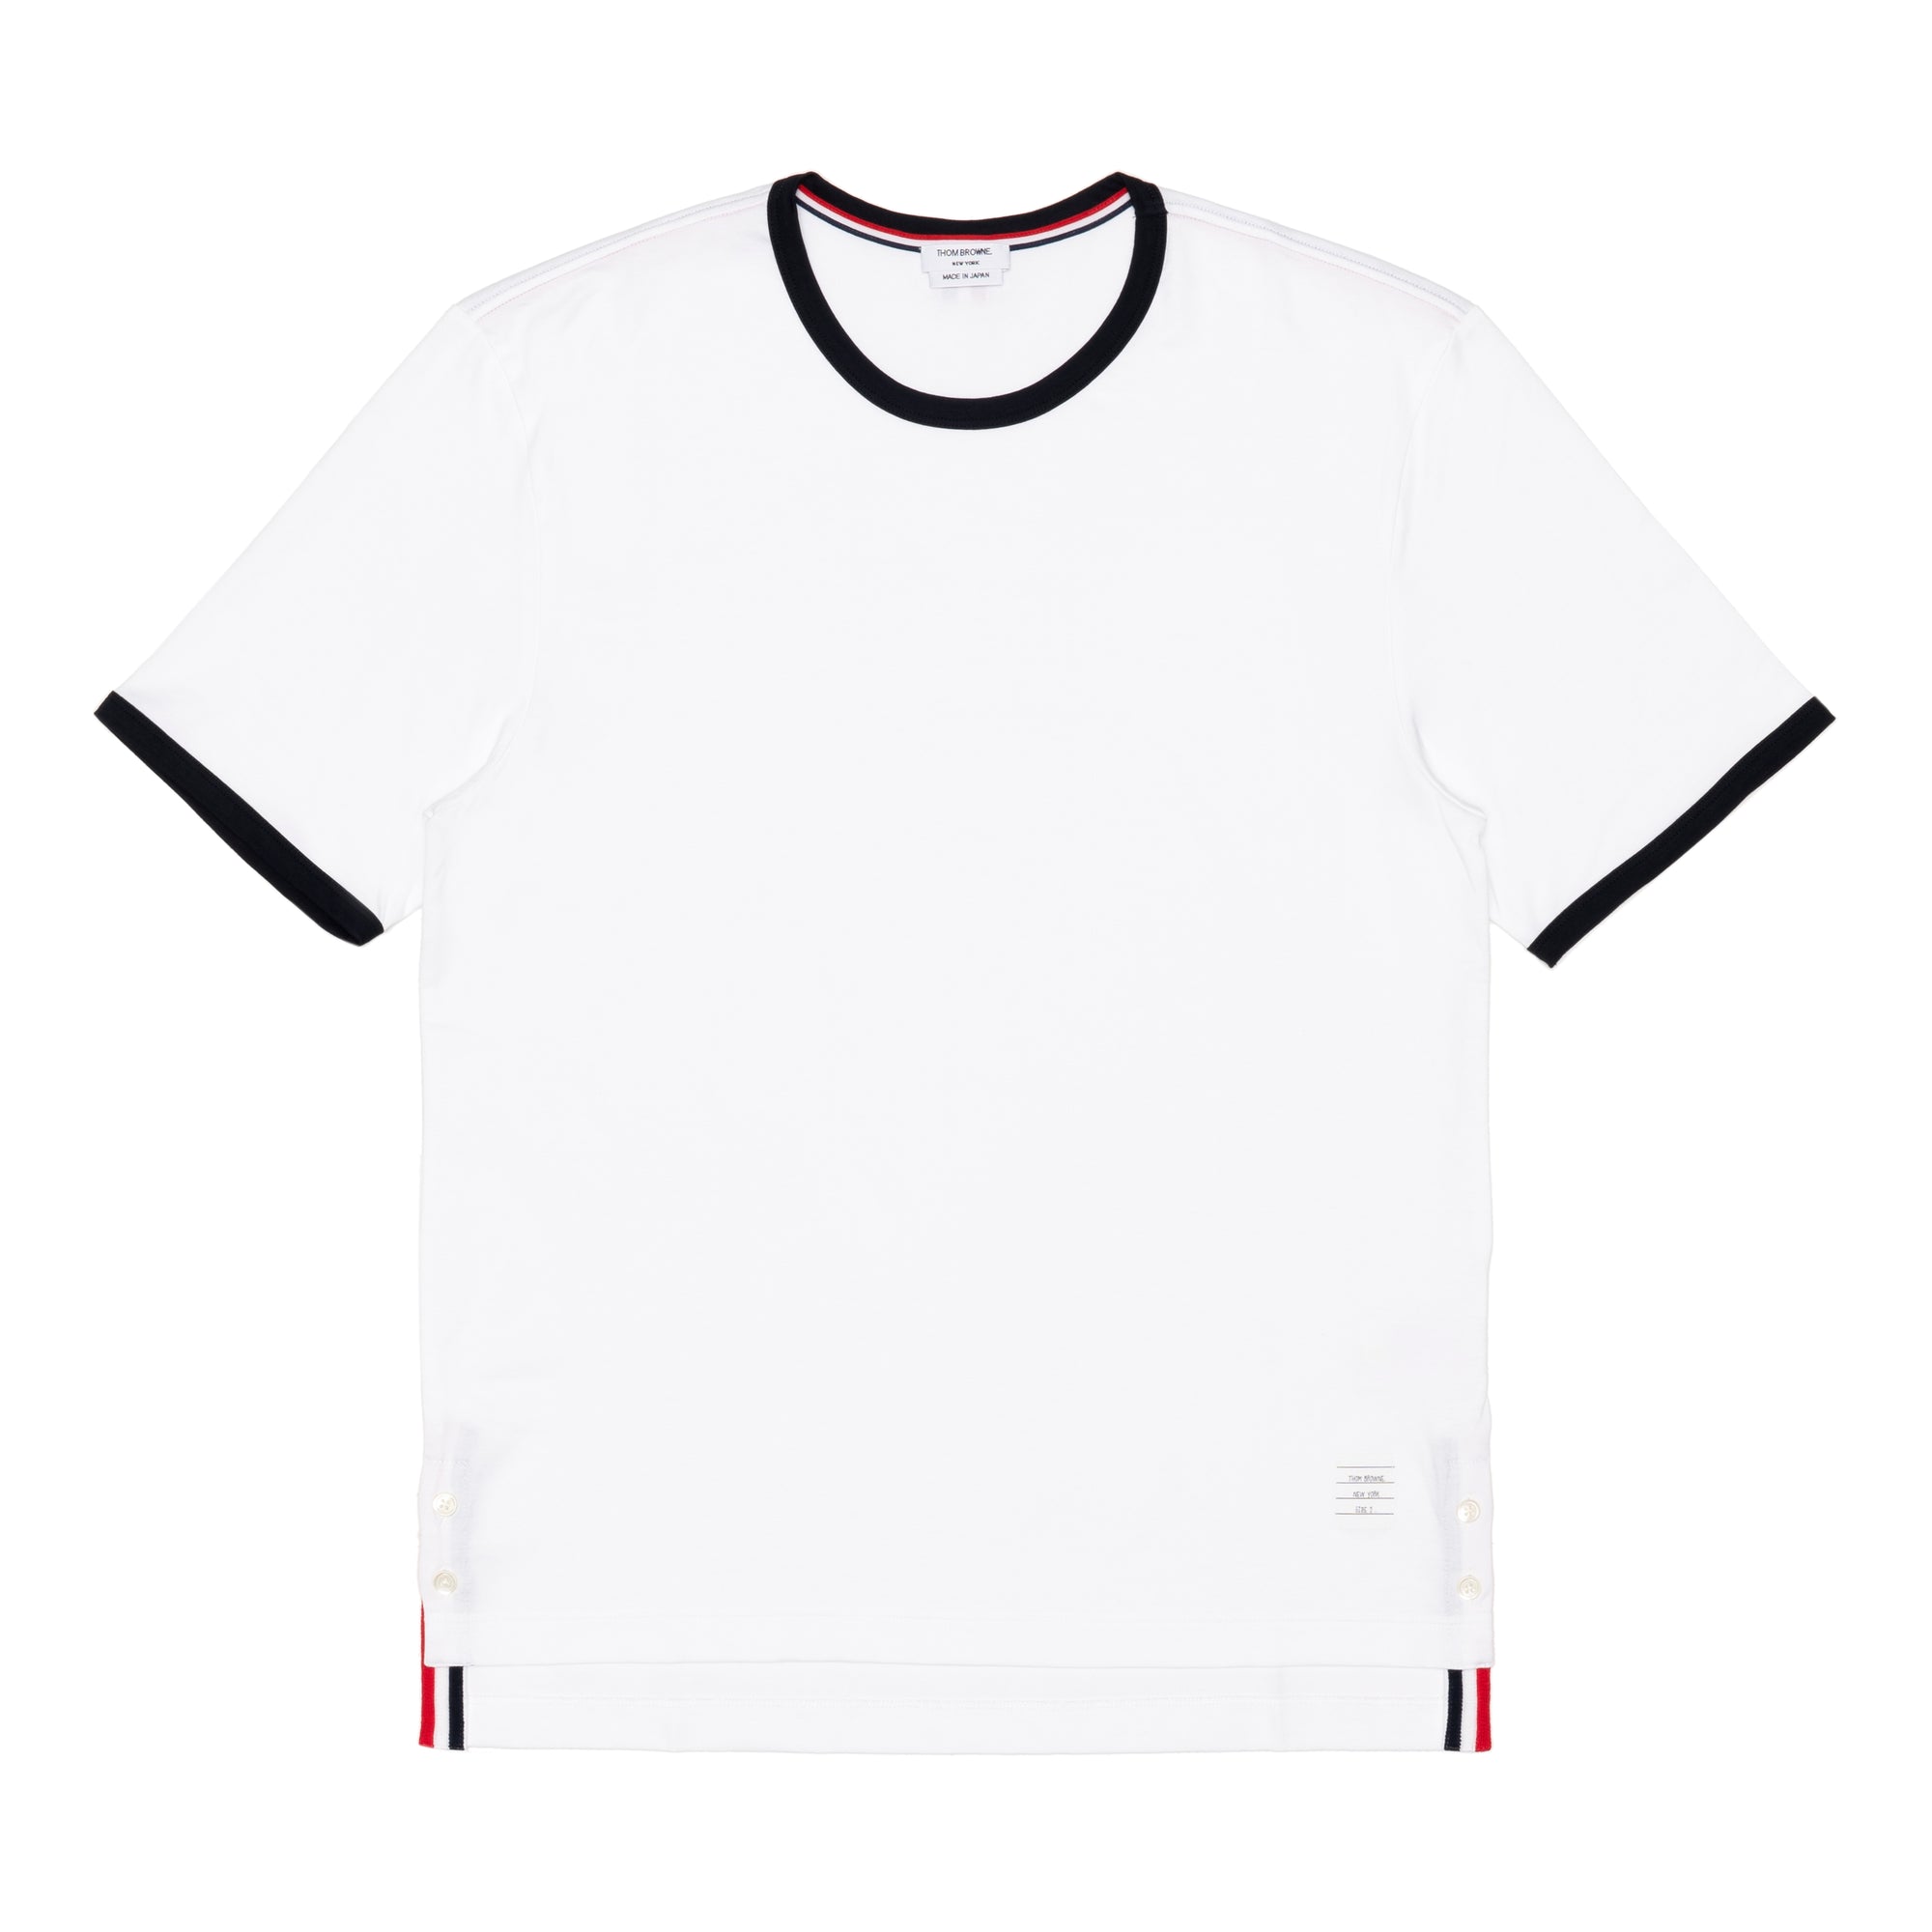 THOM BROWNE - MENS SS RINGER TEE IN MEDIUM WEIGHT - WHITE - (MJS083A-00042) view 1